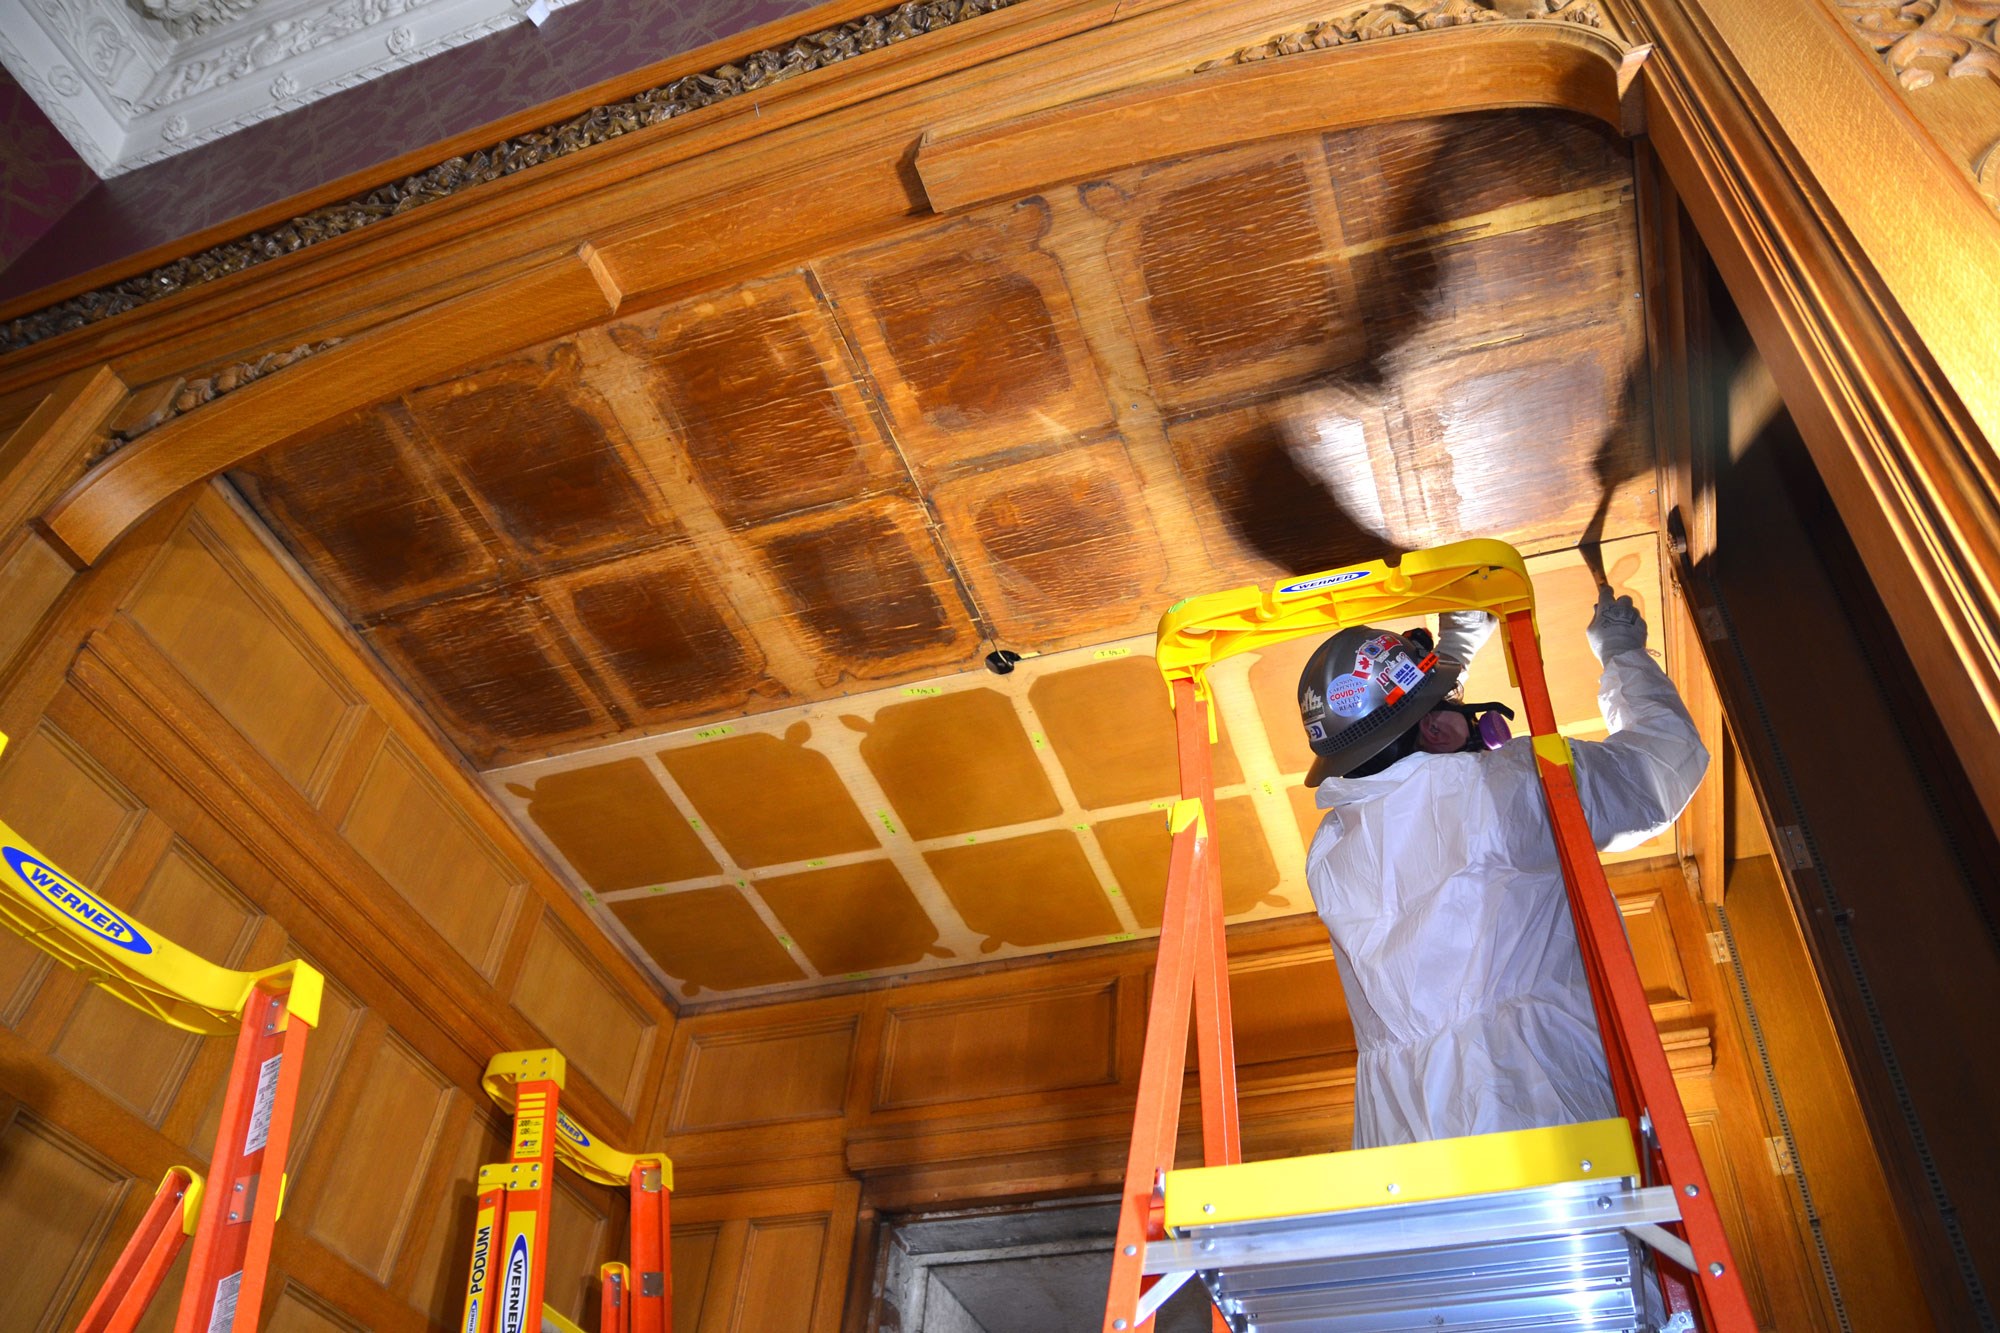 In an alcove in the Senate Reading Room, conservators are surprised and delighted to find the original ceiling underneath the dismantled contemporary one.